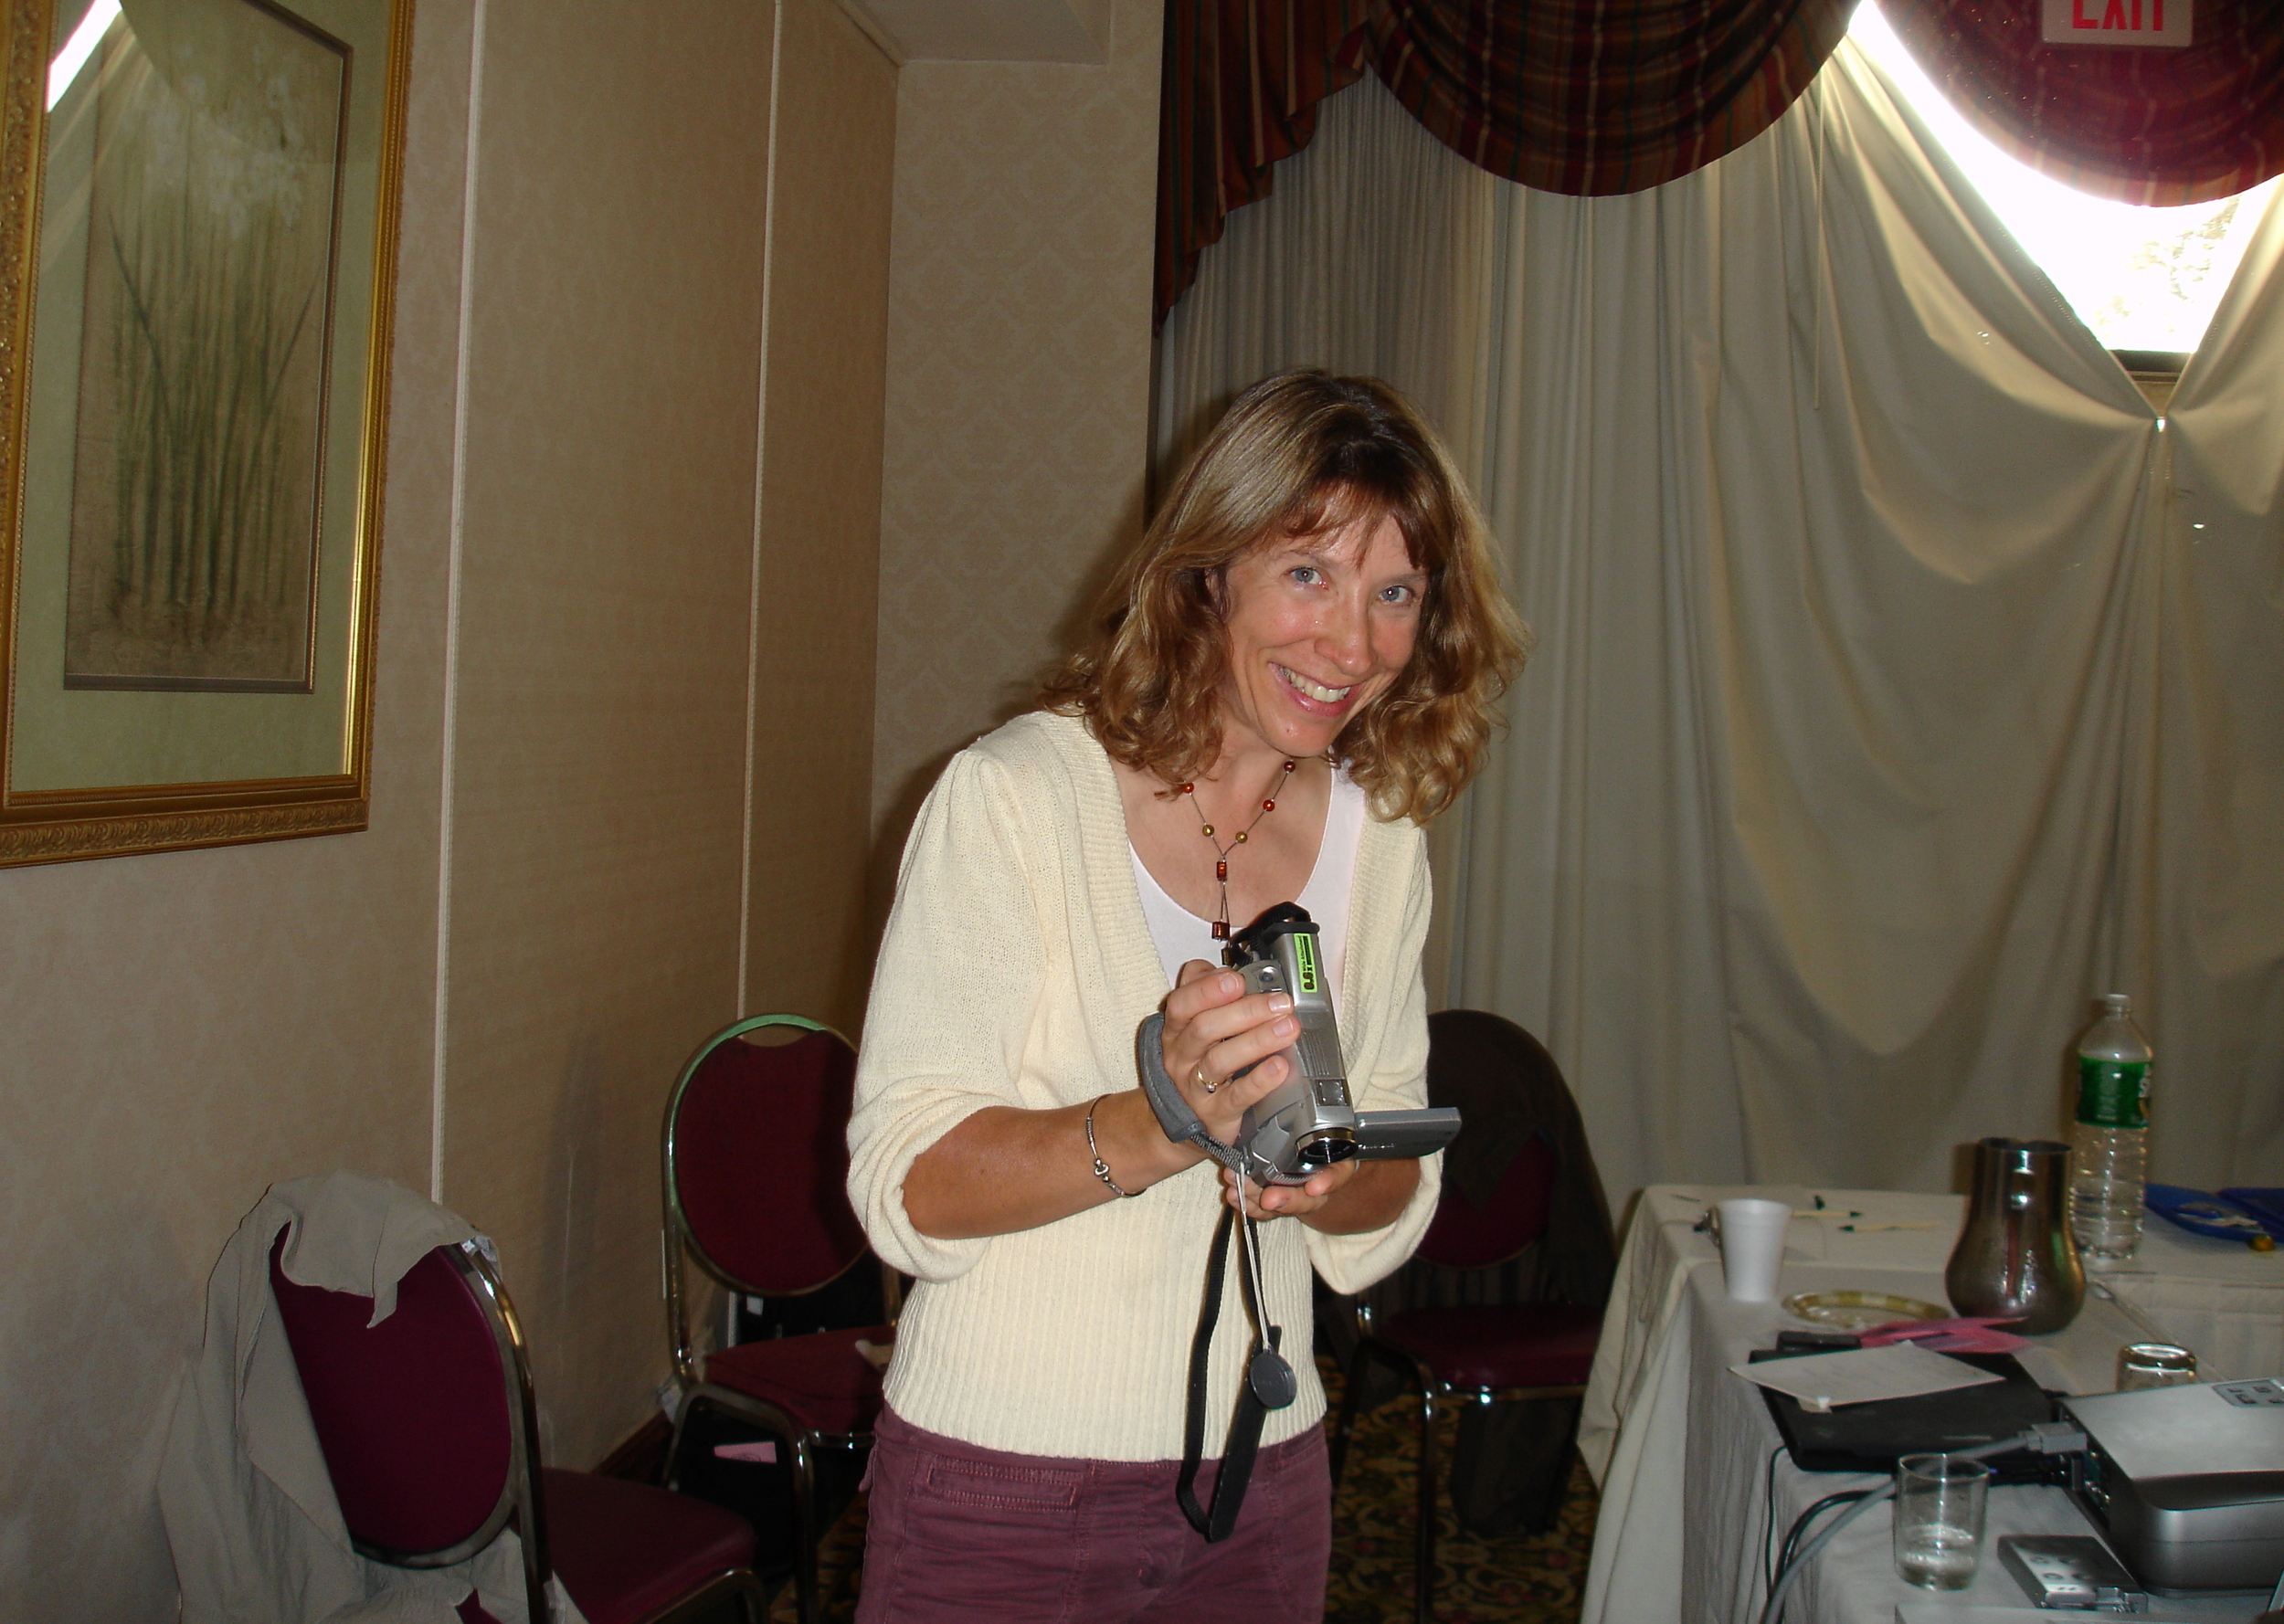 C with video first meeting 2006.jpg